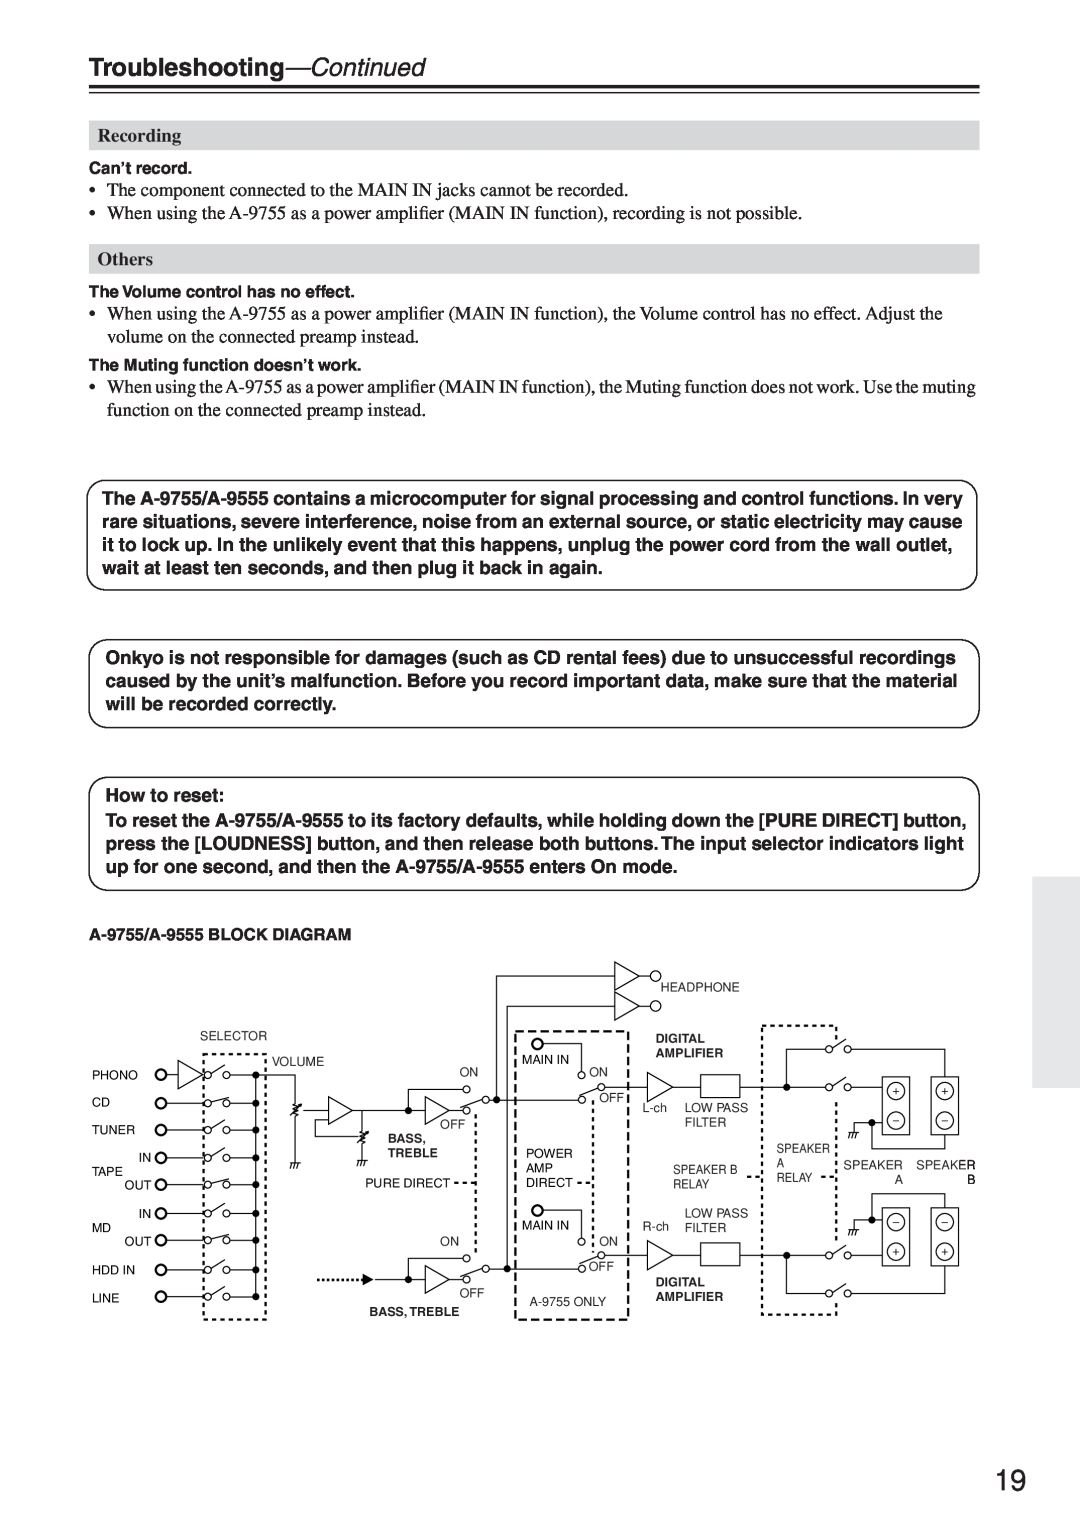 Onkyo A-9755, 9555 instruction manual Troubleshooting-Continued, Recording, Others 